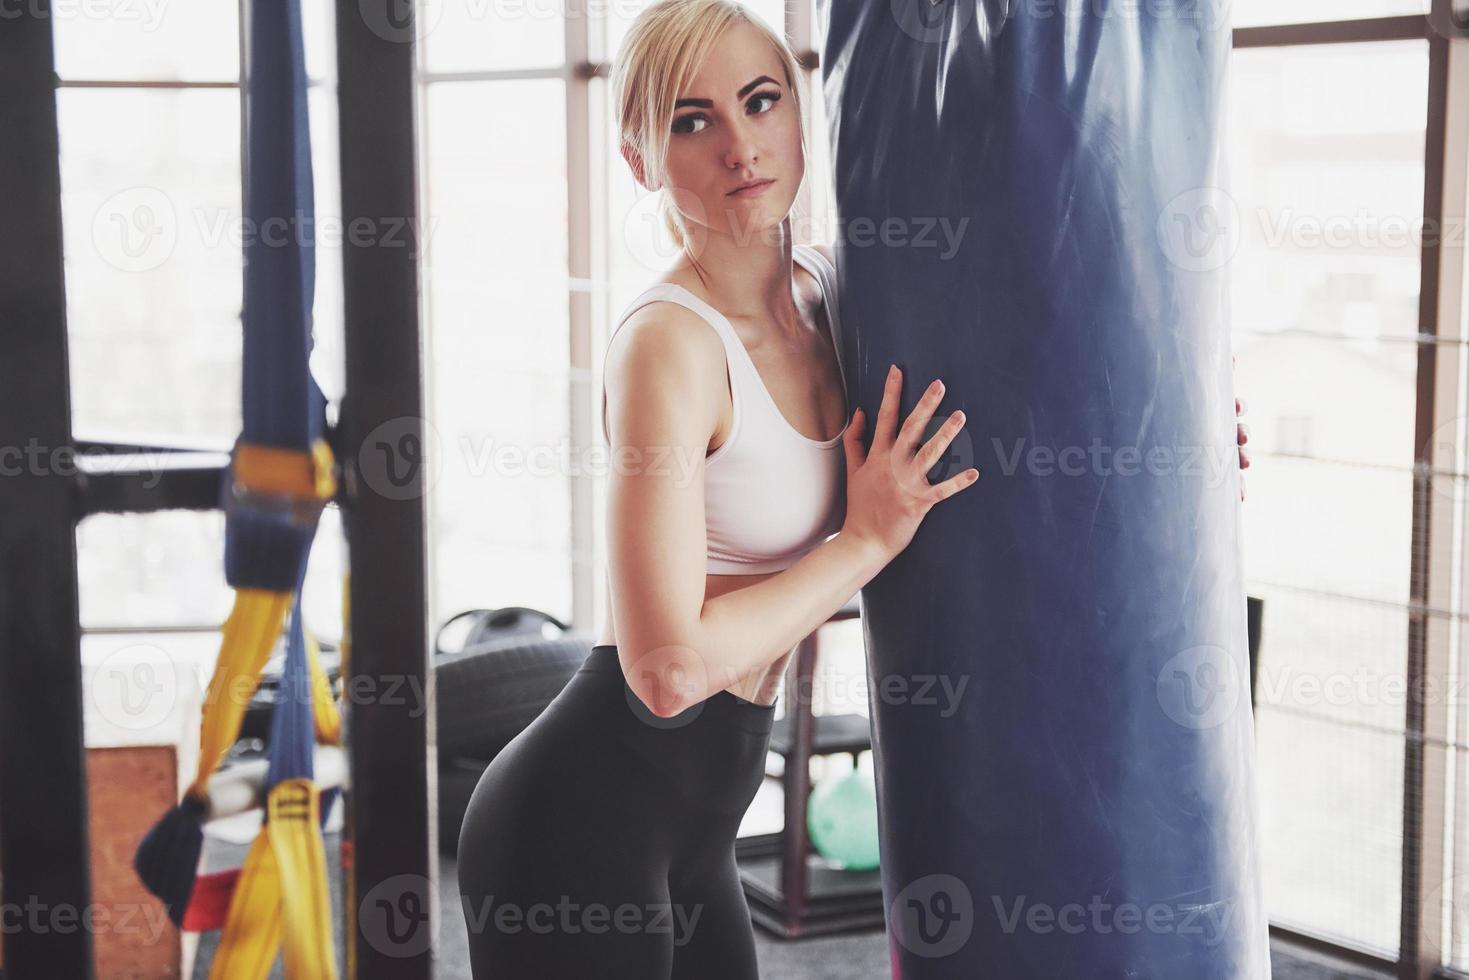 Woman lifting weights in gym Concept workout healthy lifestyle sport photo